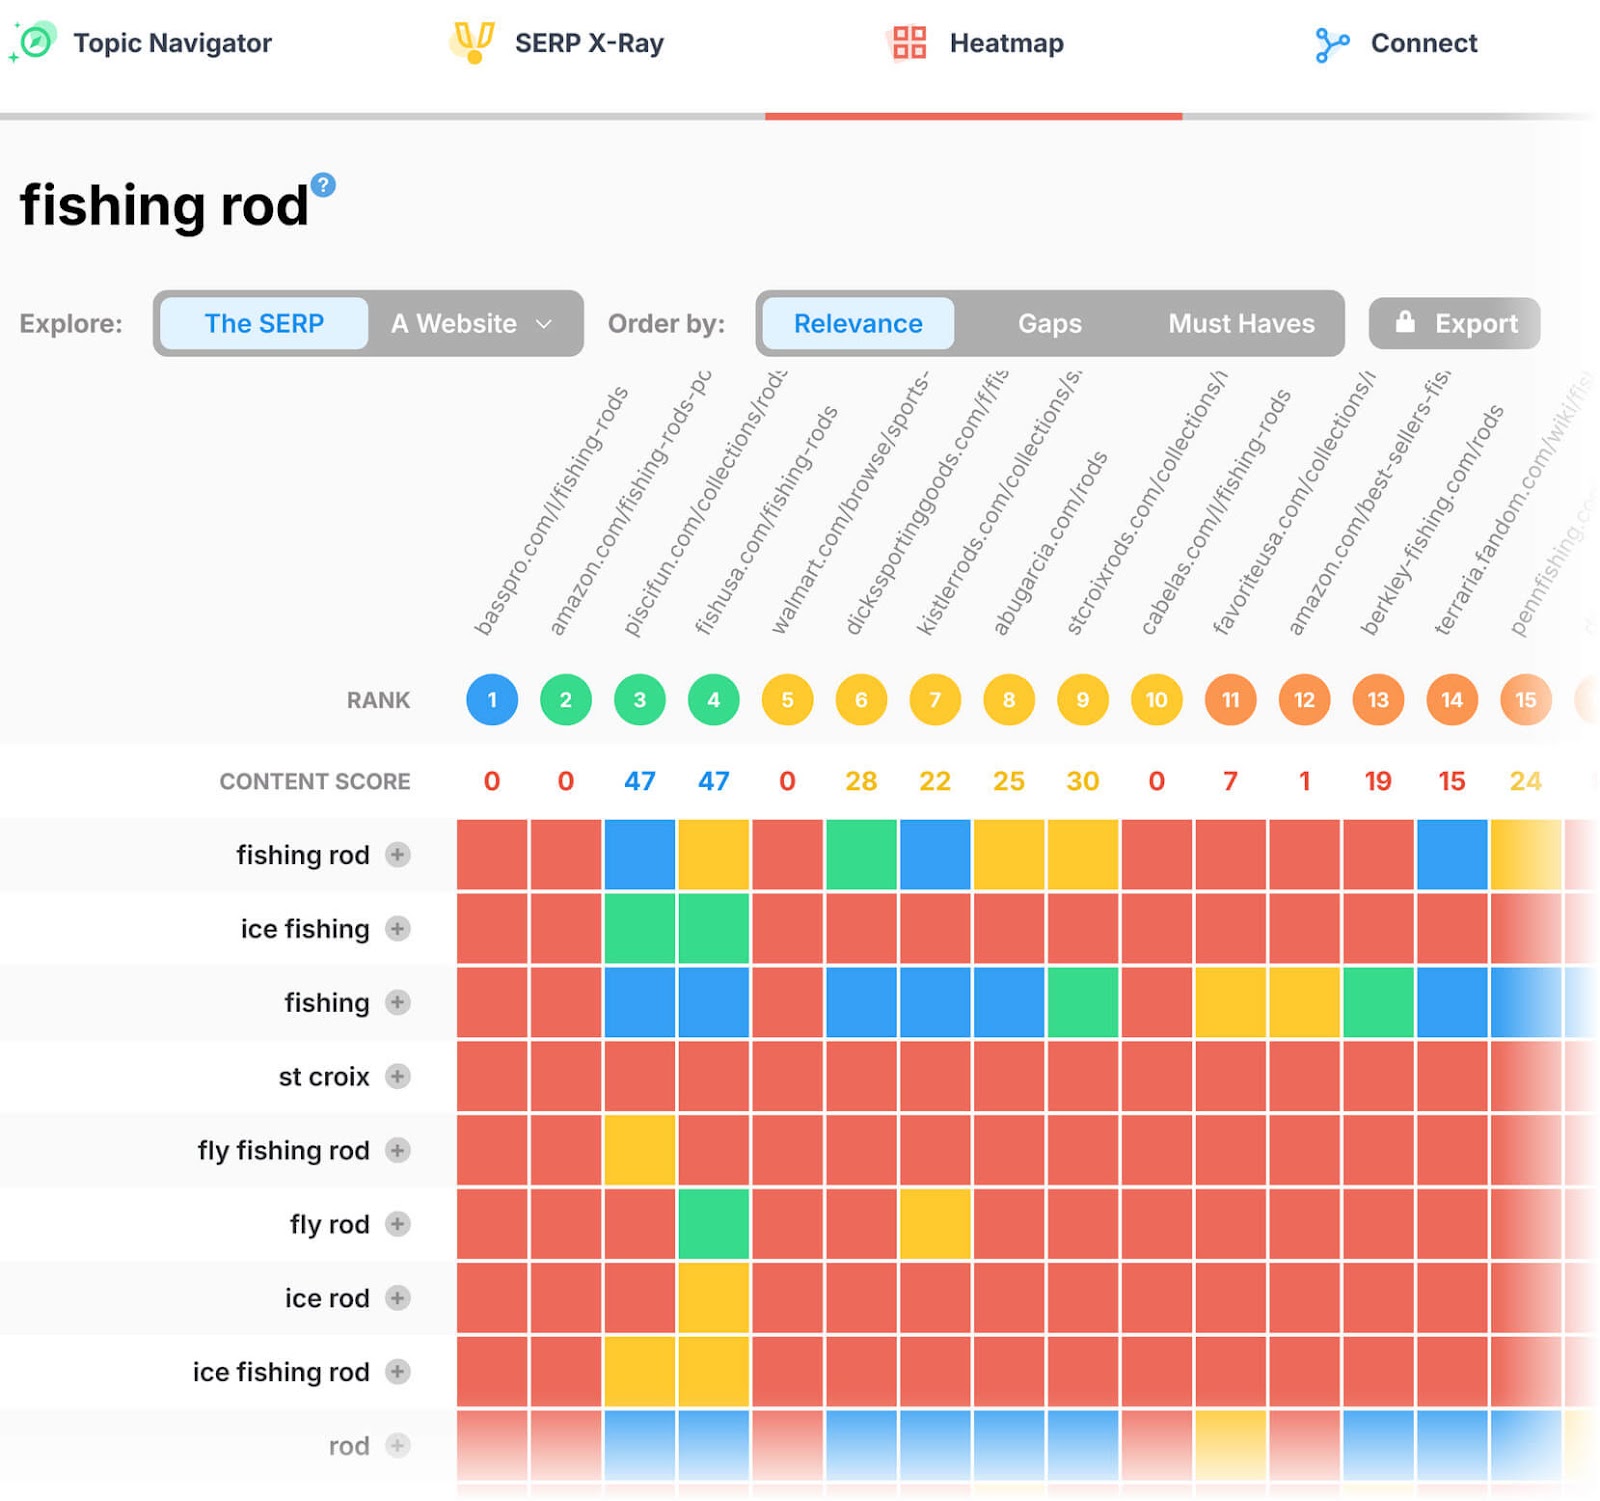 Competitive content analysis feature in MarketMuse, showing a heatmap for "fishing rod" keyword